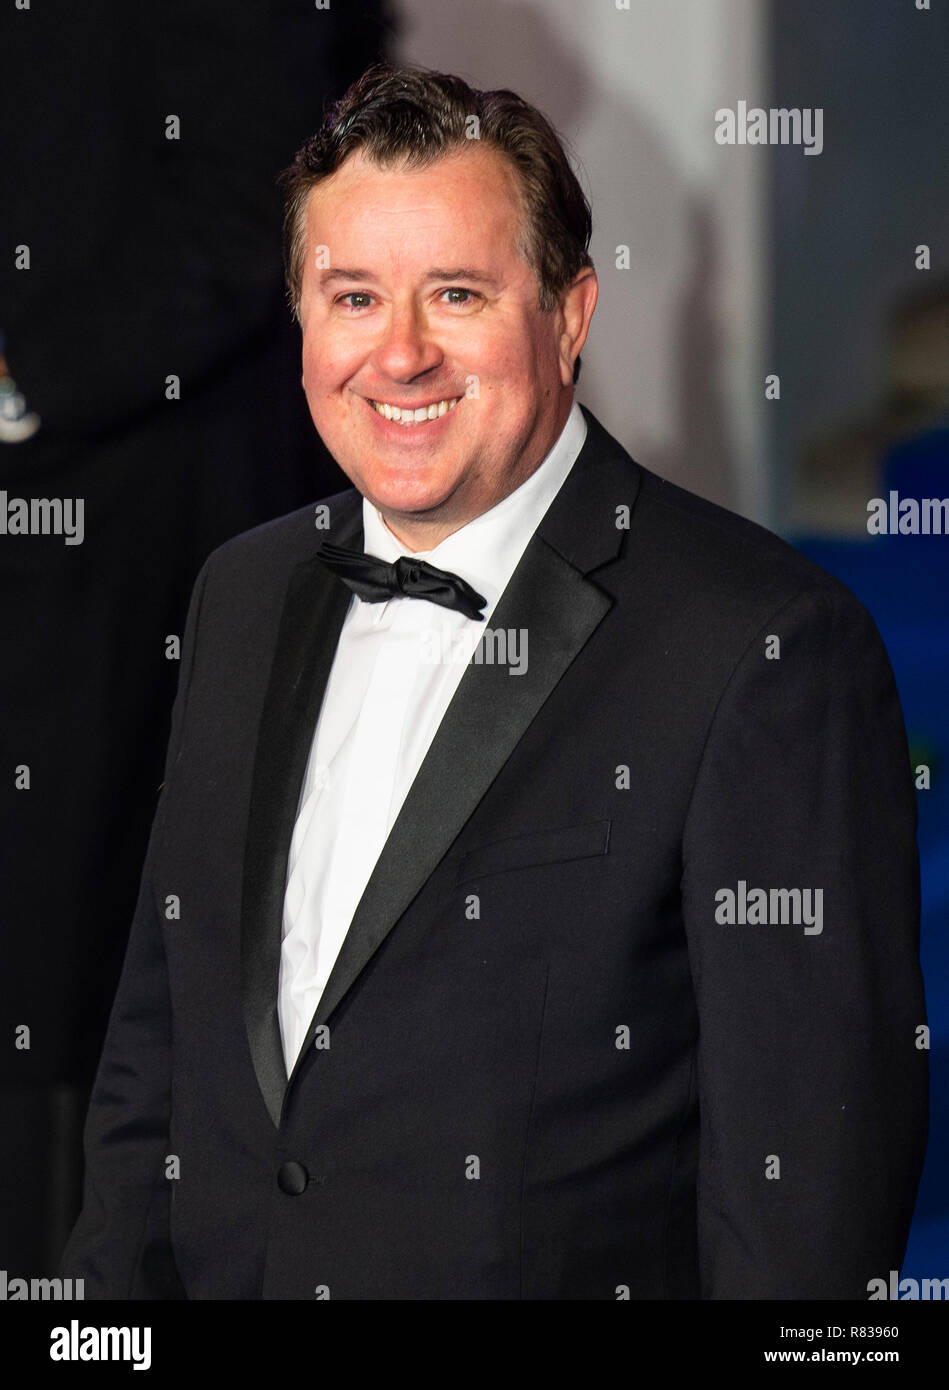 London, UK. 12th Dec 2018. Jeremy Swift attends the European Premiere of 'Mary Poppins Returns' at Royal Albert Hall on December 12, 2018 in London, England Credit: Gary Mitchell, GMP Media/Alamy Live News Stock Photo